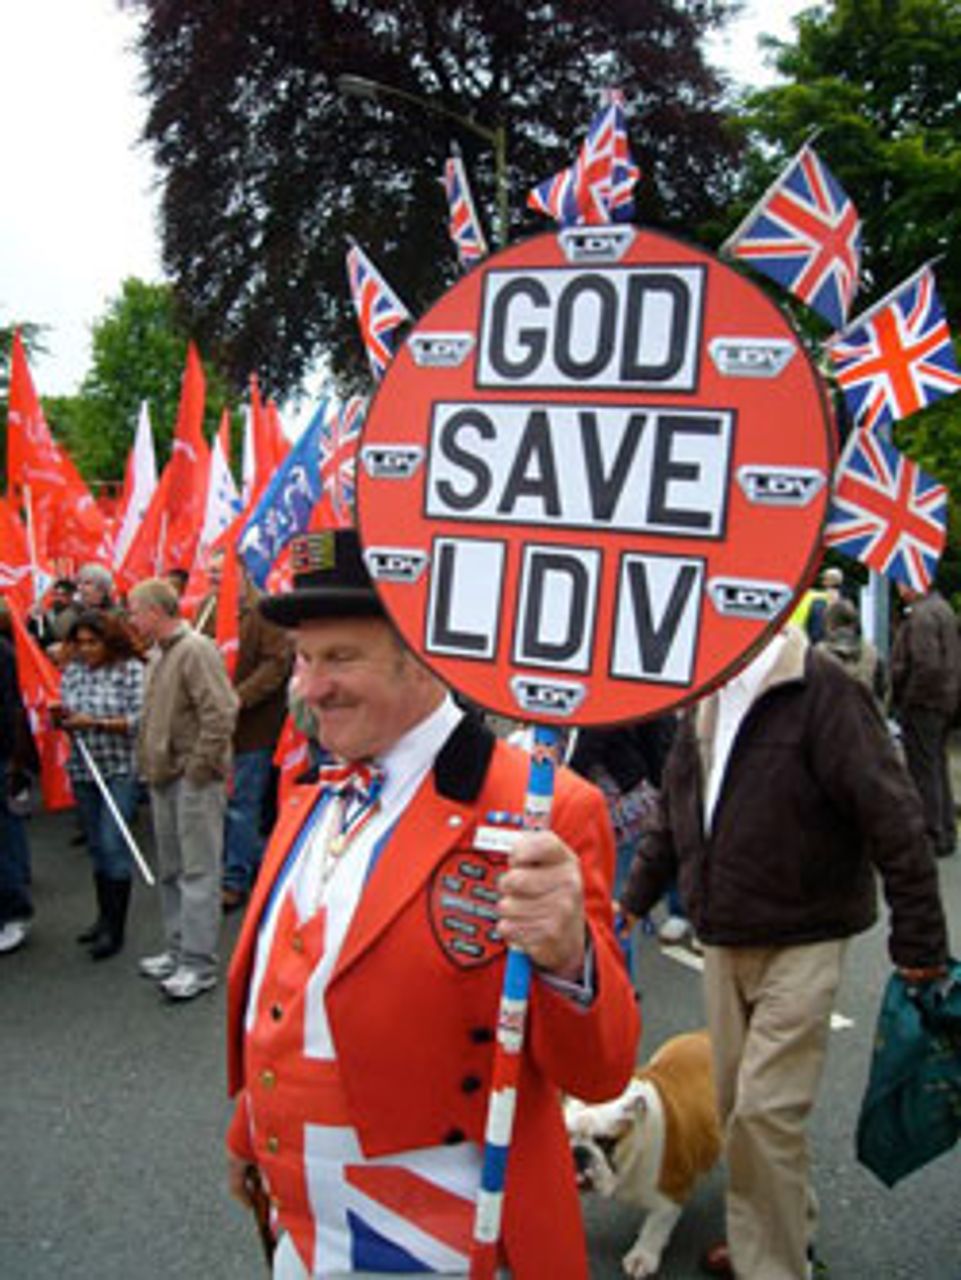 A protester dressed in the Union Jack